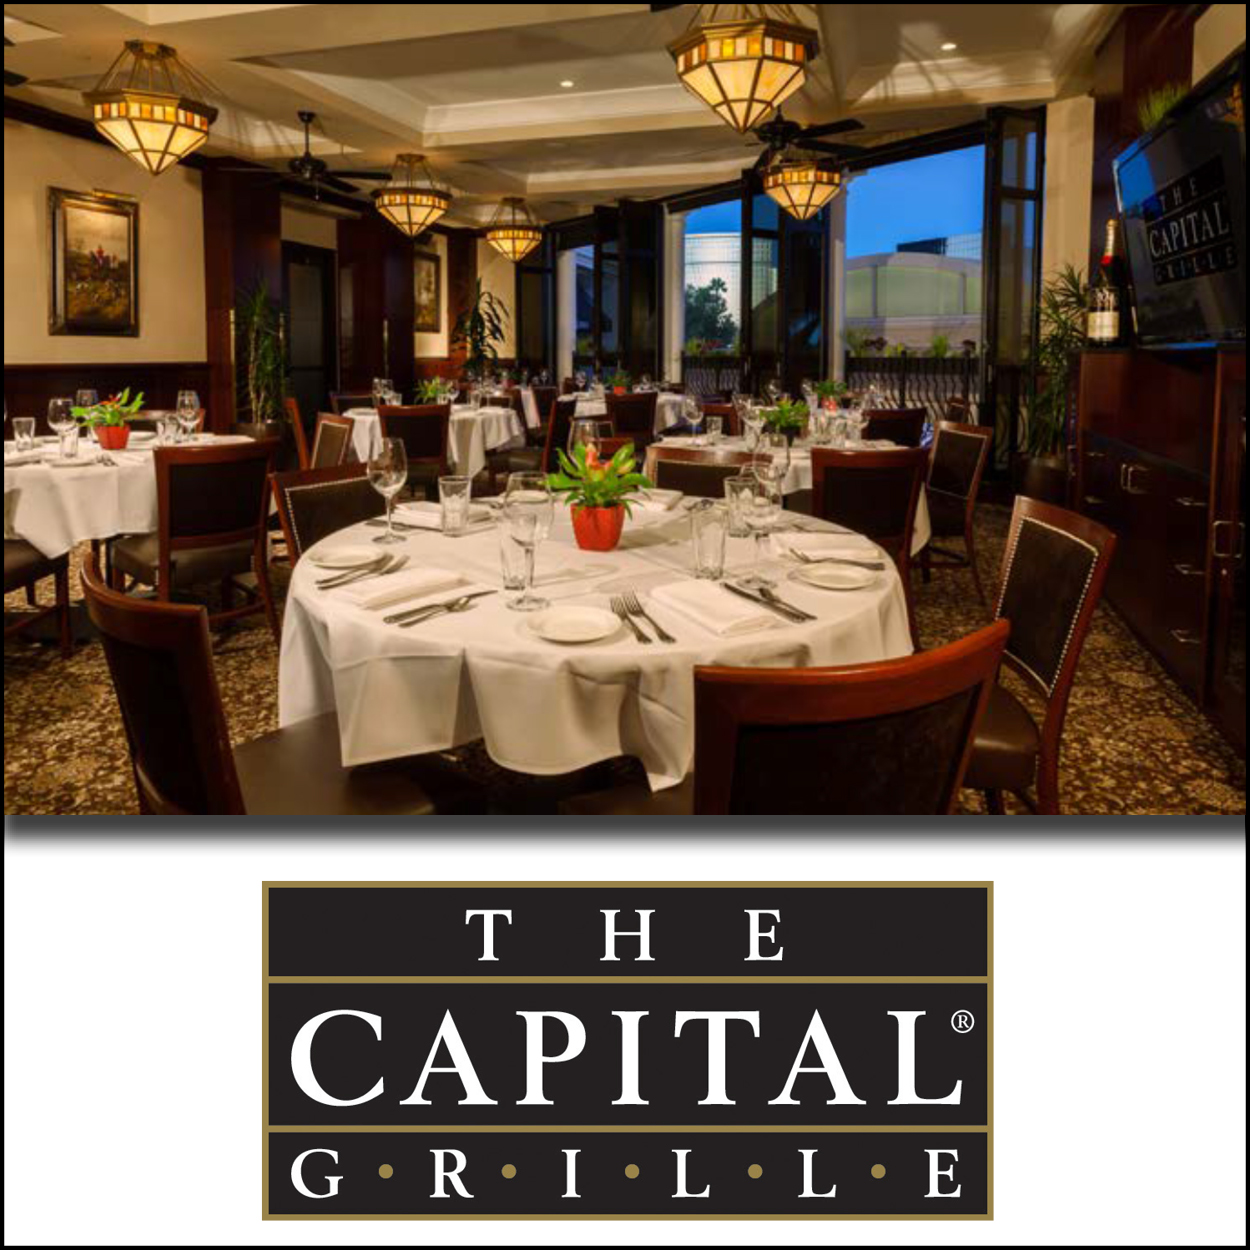 April 2022 Networking Luncheon - The Capital Grille